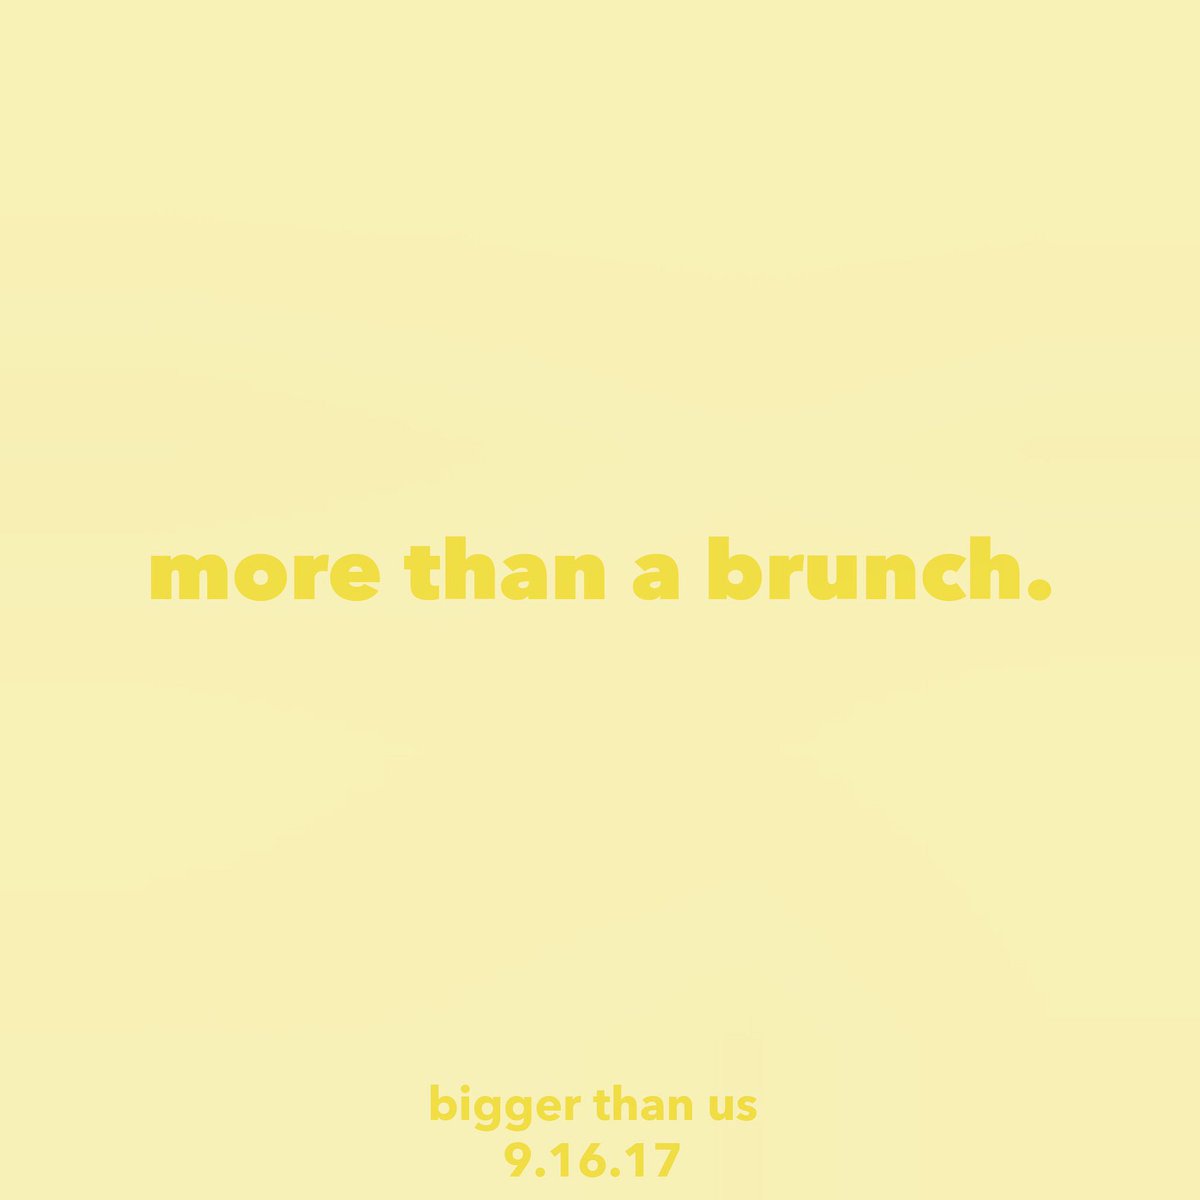 @bellarozzay @btubrunch so mark your calendars, September 16th, we are having our first one and it's #morethanabrunch. (@btubrunch) 💛